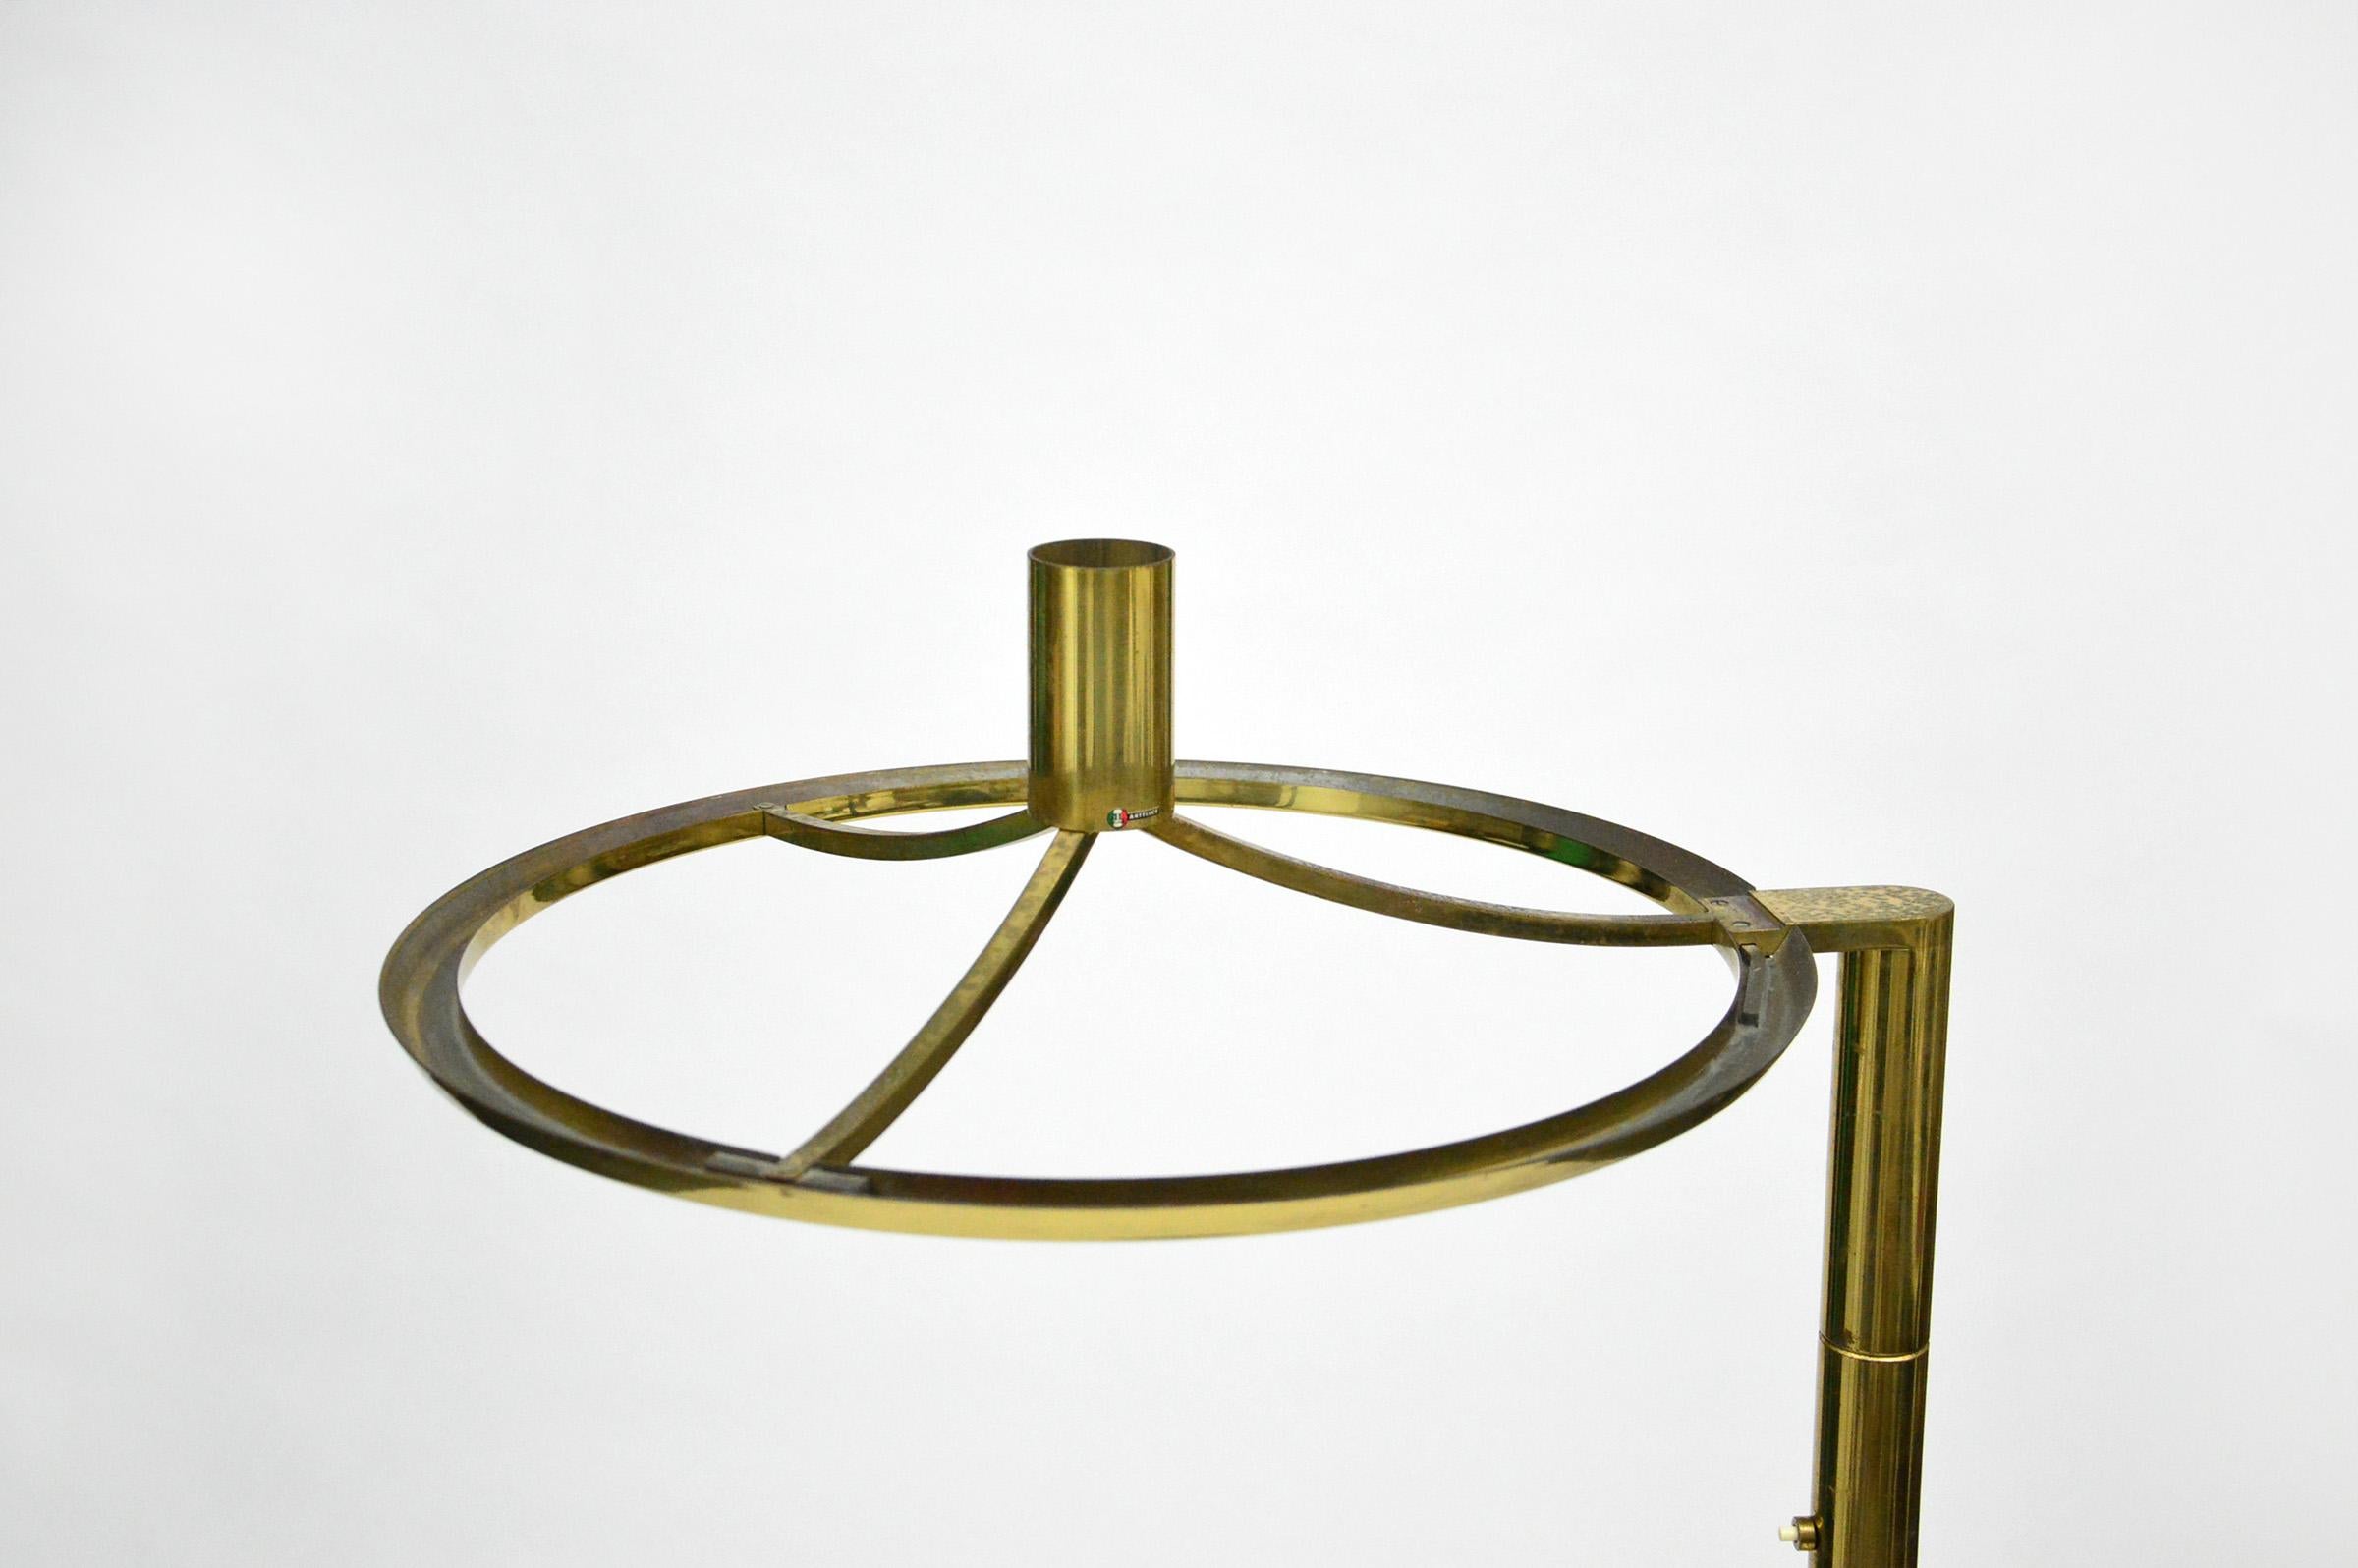 20th Century Arteluce Floor Lamp by Gregotti, Meneghetti and Stoppino 1966 For Sale